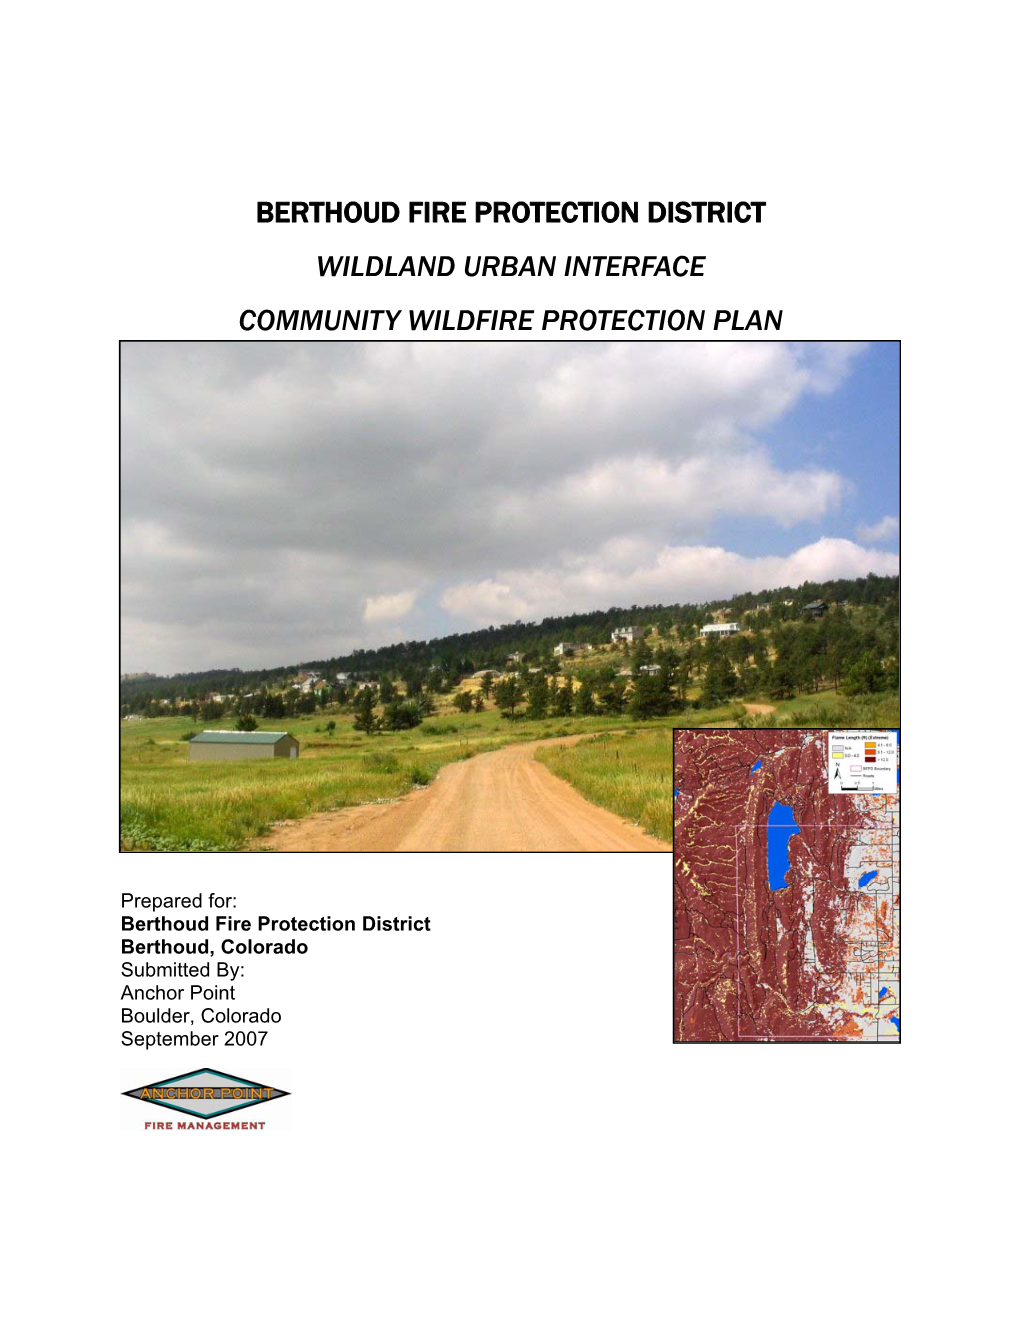 Berthoud Fire Protection District CWPP Provides Guidance to Promote the Health, Safety and Welfare of the Community